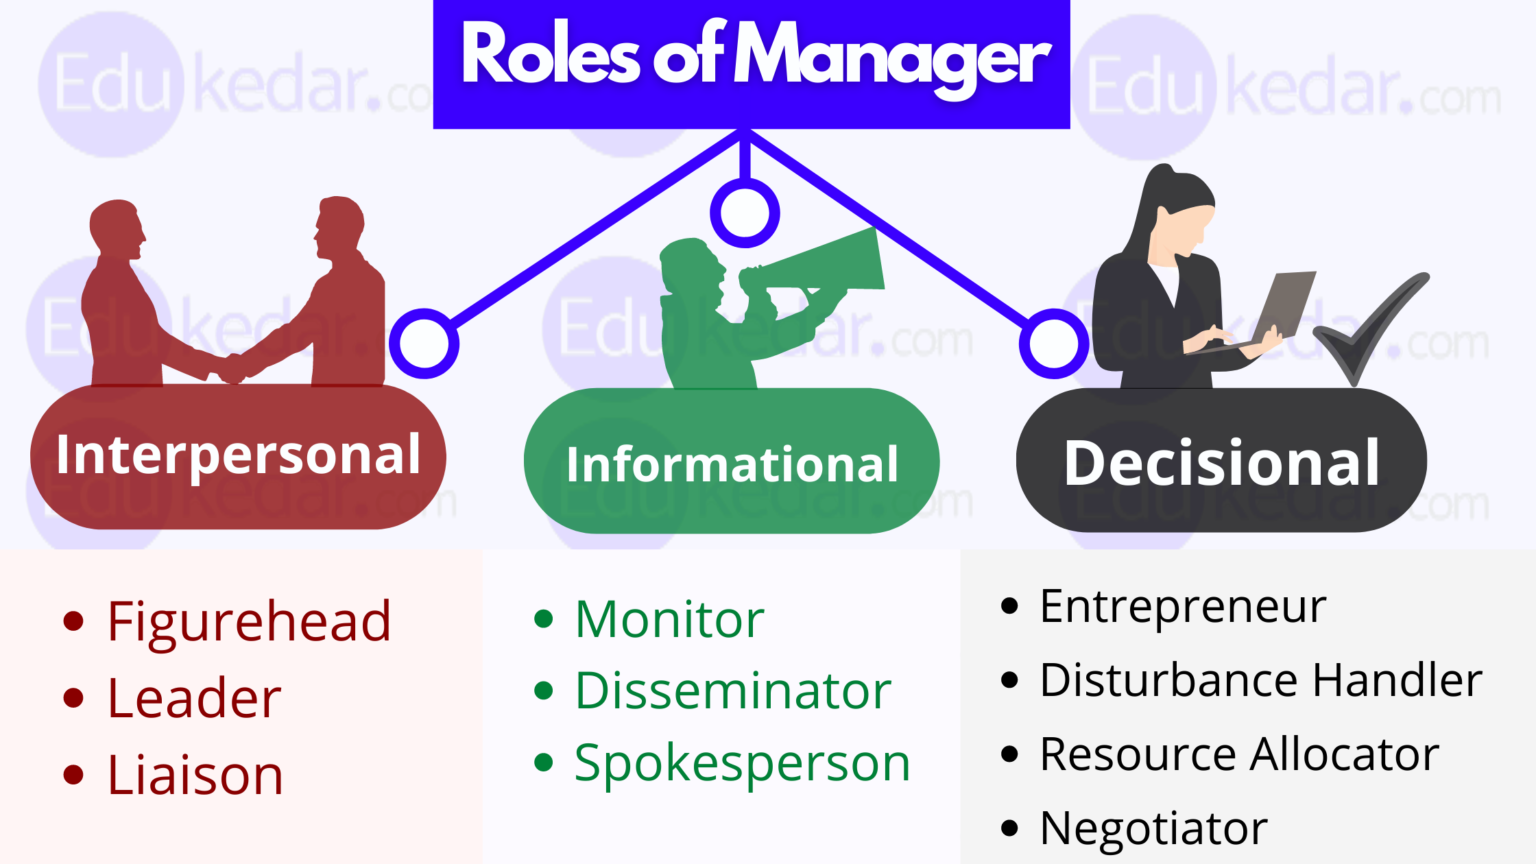  The image shows the roles of a manager in an organization. The three main roles are interpersonal, informational, and decisional. Interpersonal roles include figurehead, leader, and liaison. Informational roles include monitor, disseminator, and spokesperson. Decisional roles include entrepreneur, disturbance handler, resource allocator, and negotiator.